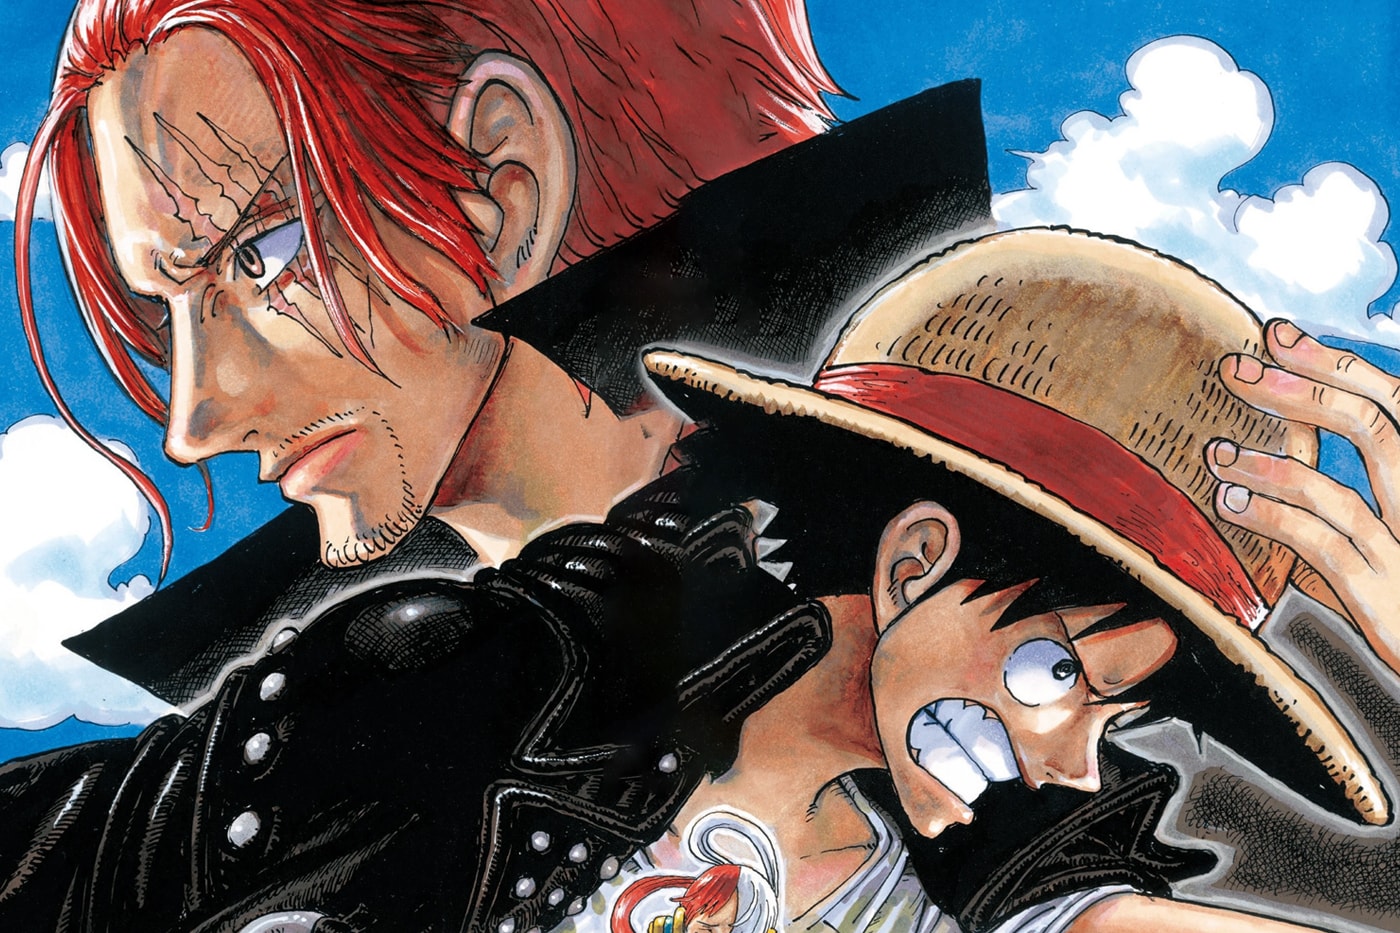 One Piece anime schedule confirms the impending debut of Gear 5